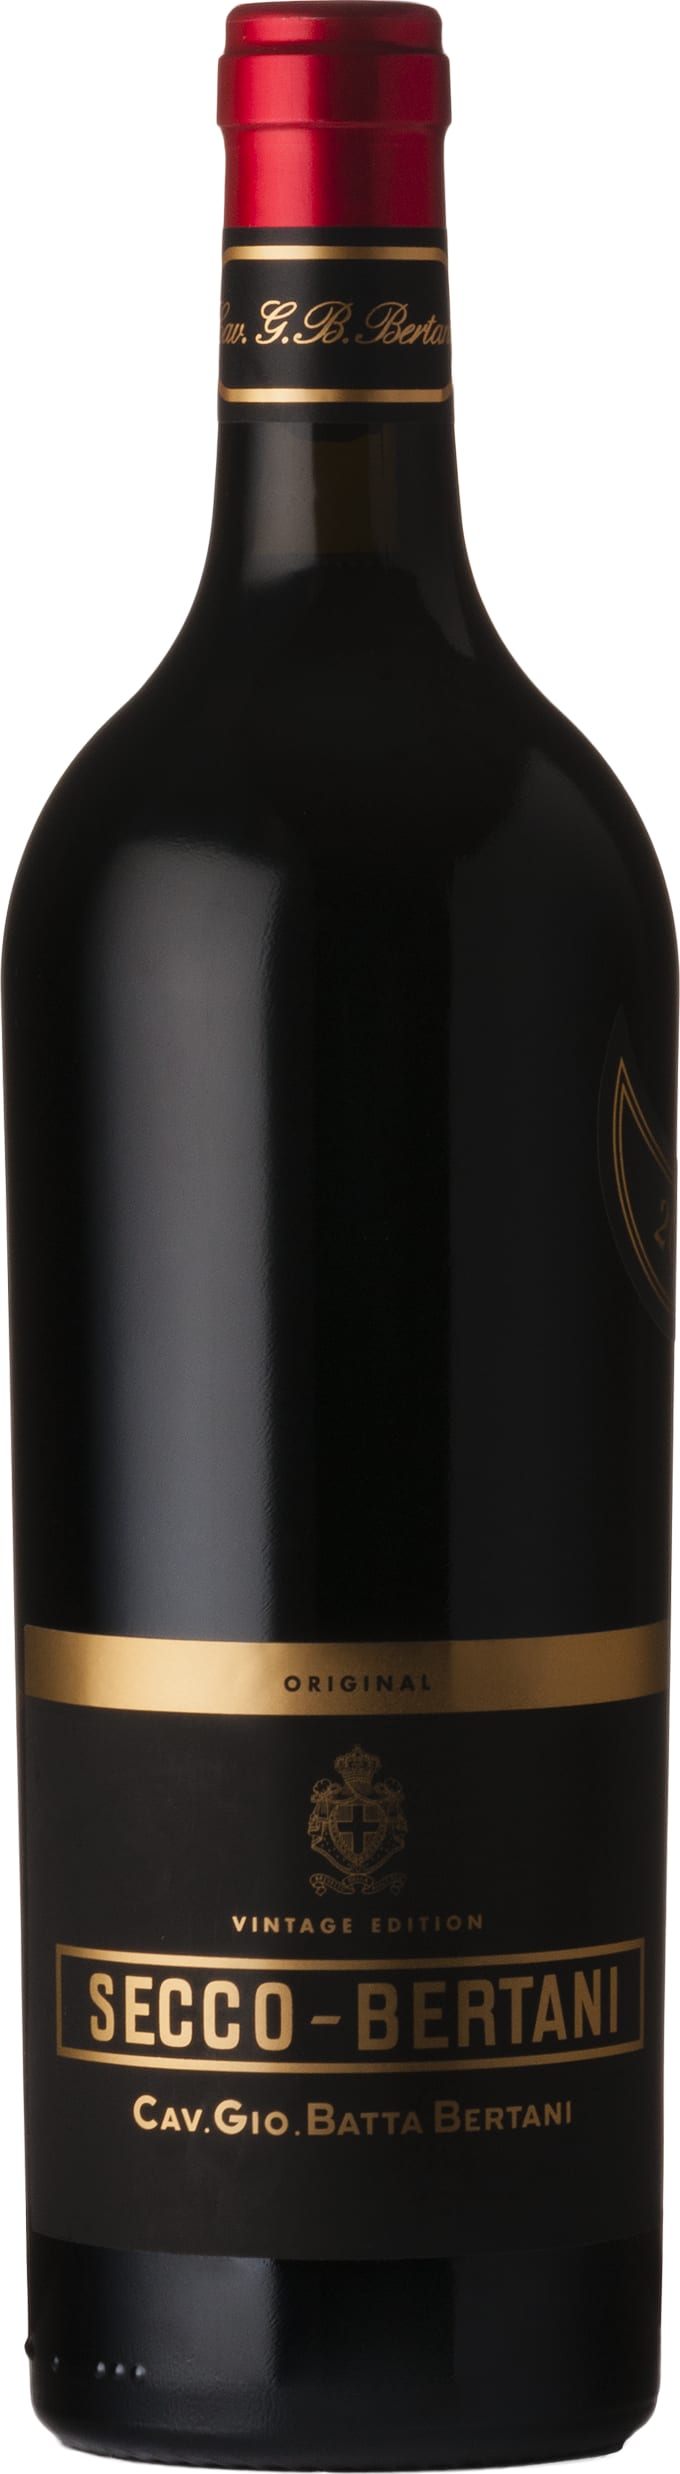 Bertani Vintage Edition Secco 2020 75cl - Buy Bertani Wines from GREAT WINES DIRECT wine shop